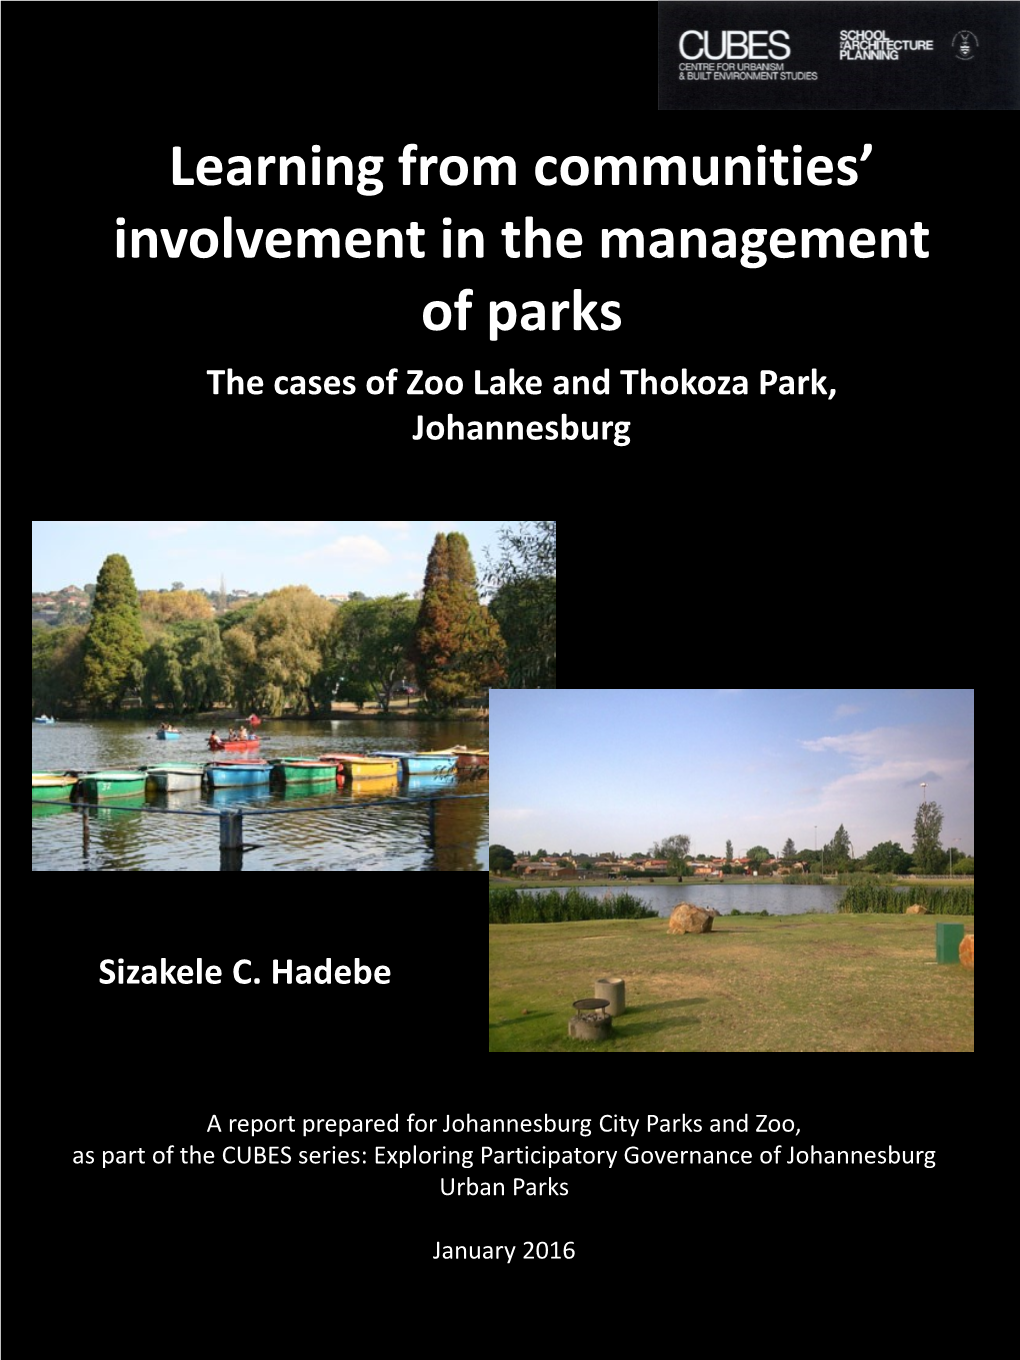 Learning from Communities' Involvement in the Management Of